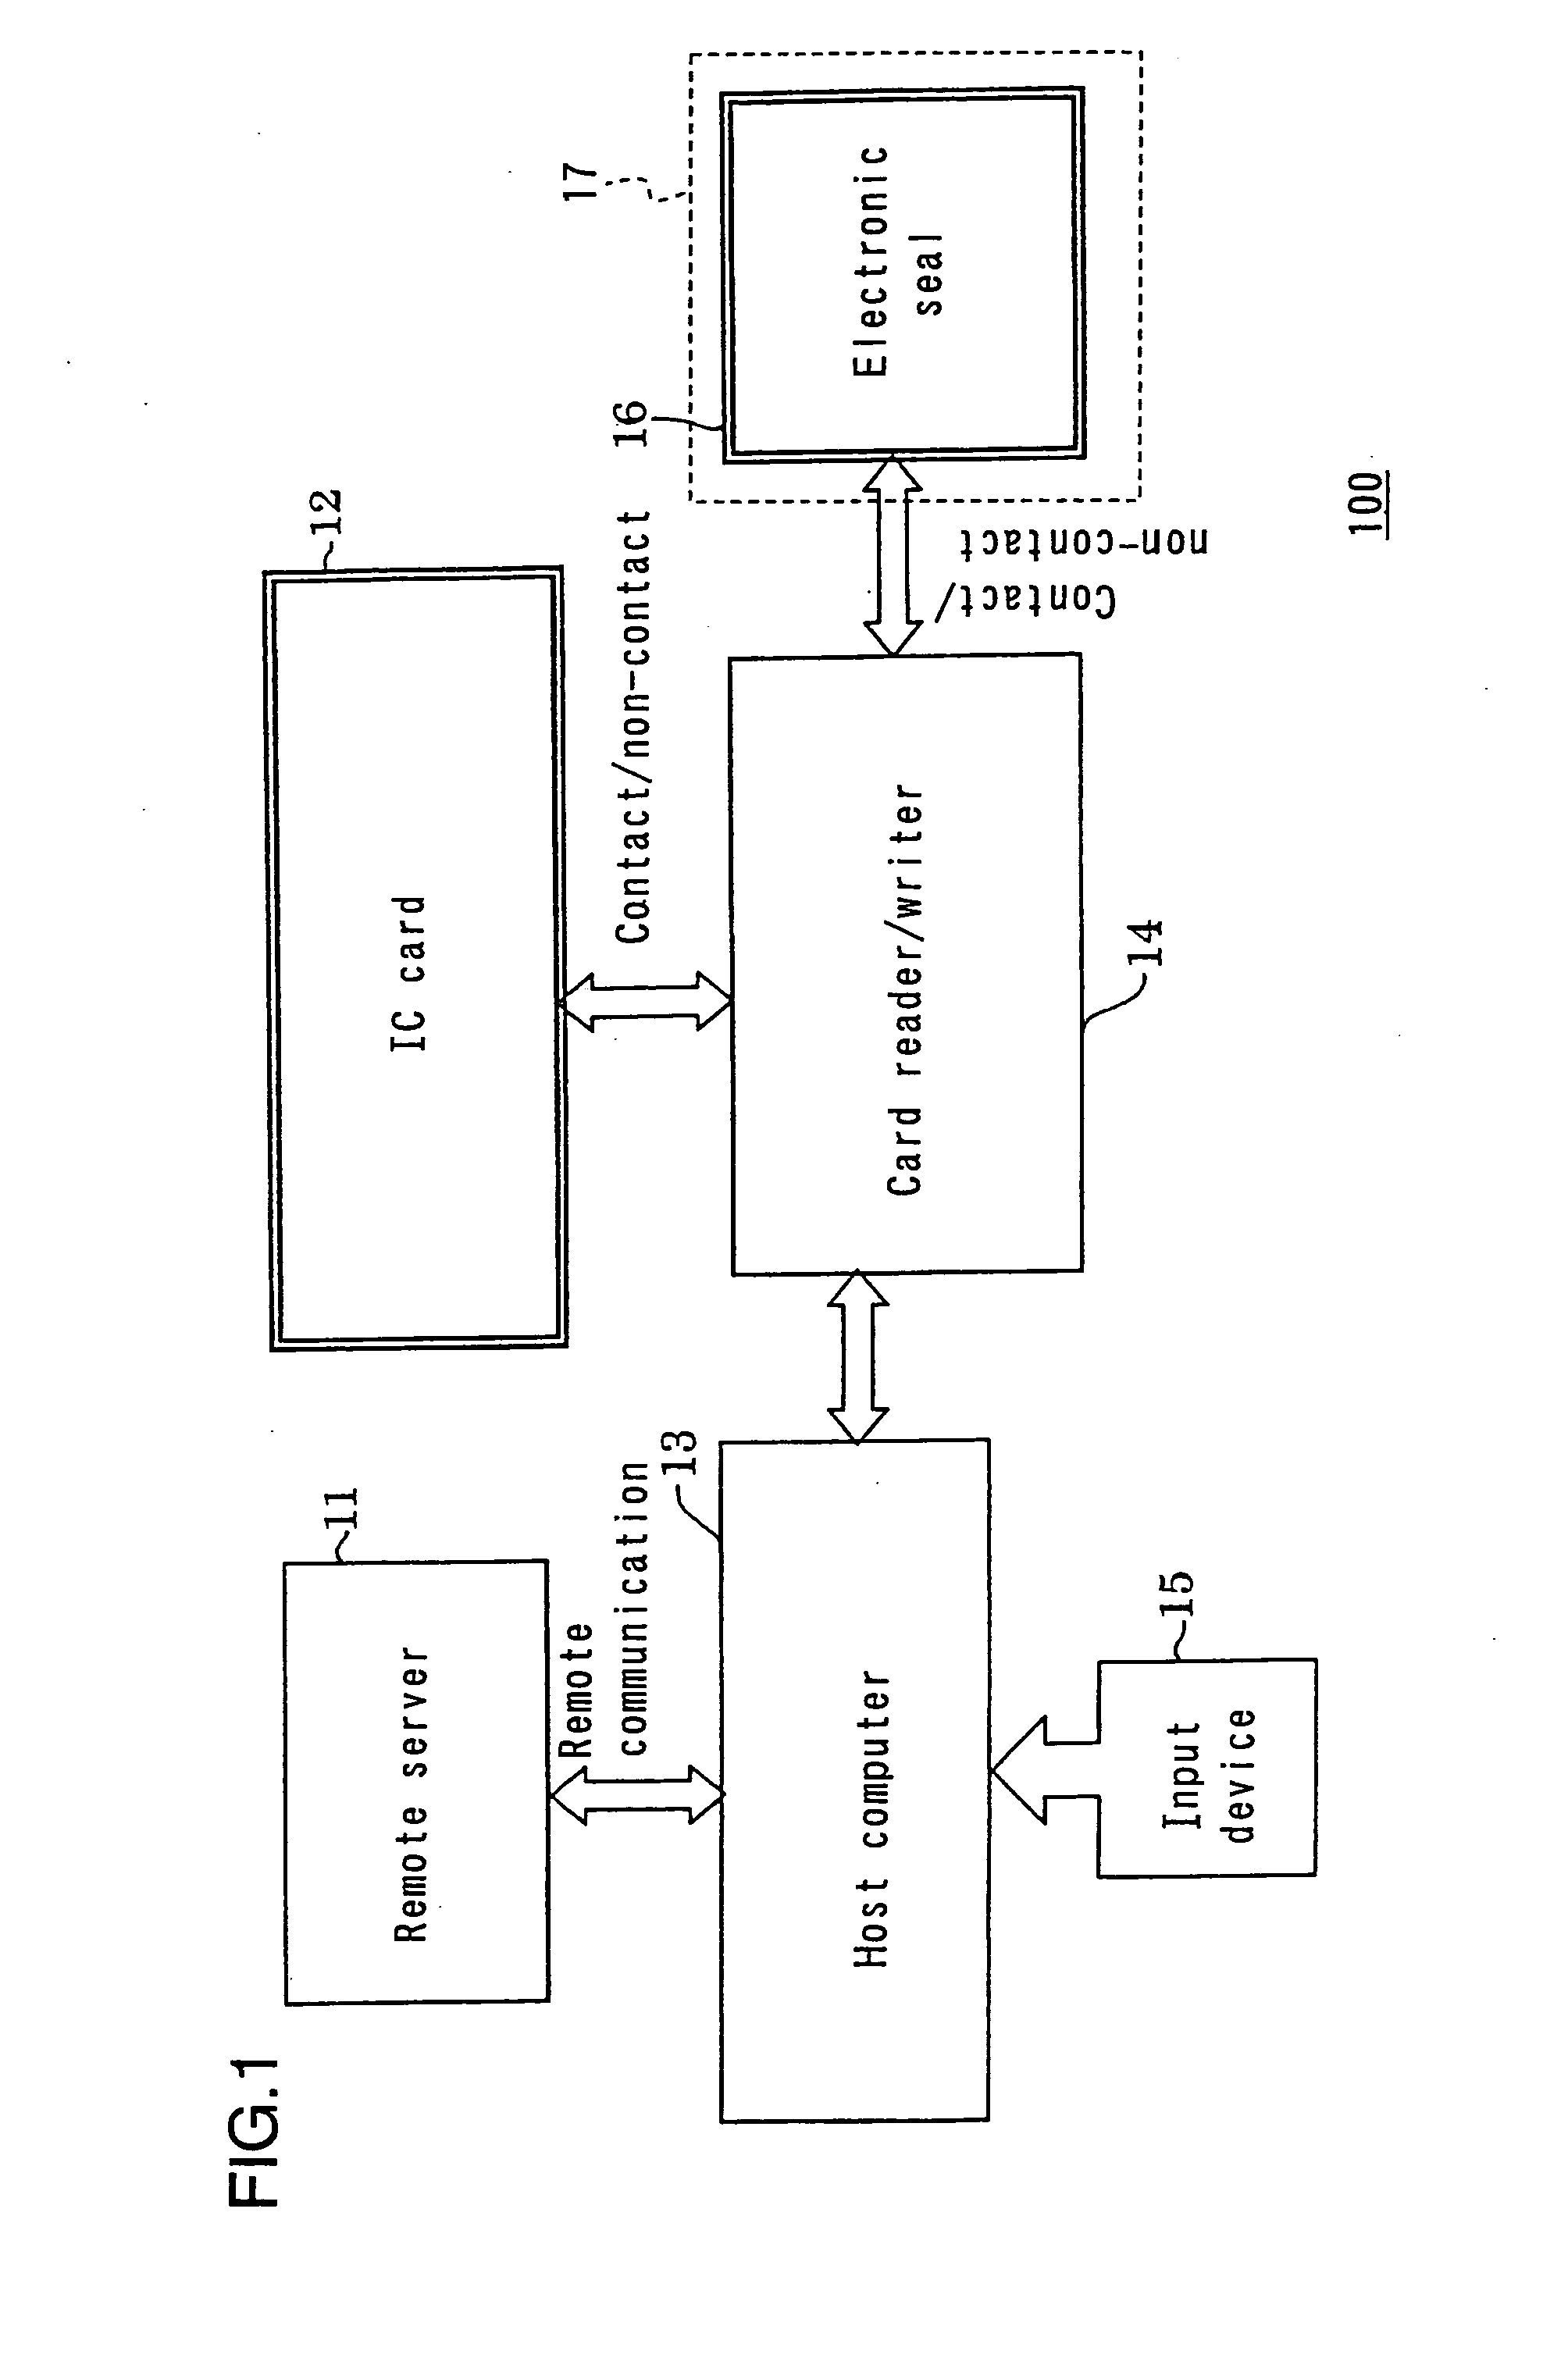 Electronic seal, IC card, authentication system using the same, and mobile device including such electronic seal